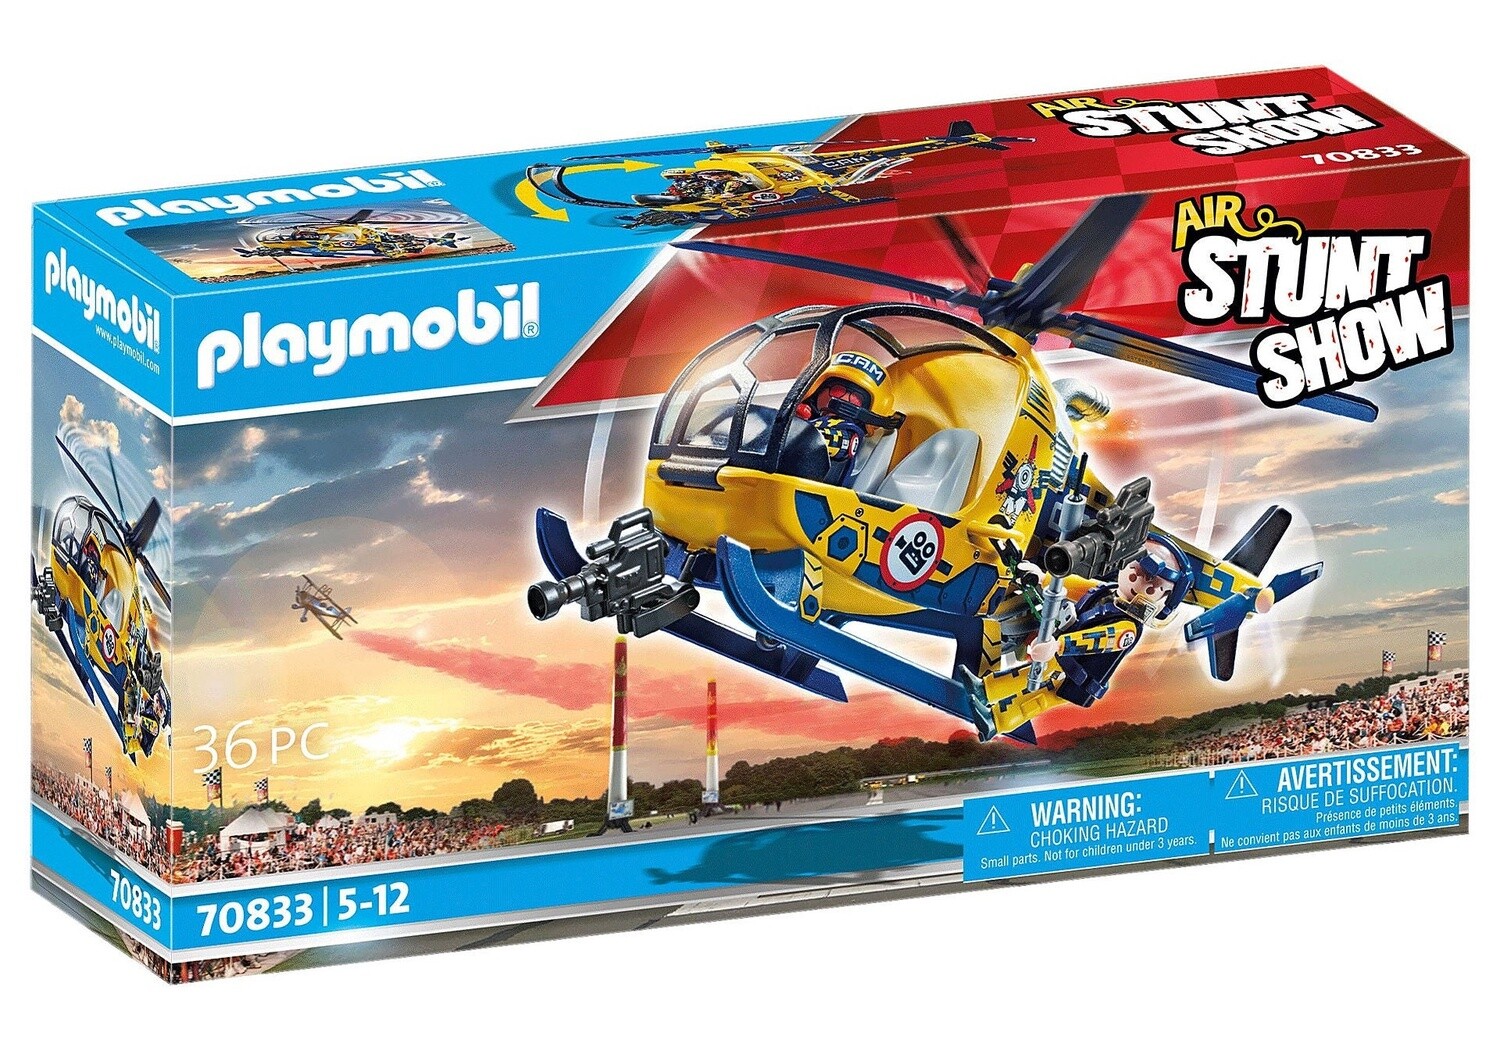 Playmobil Air Stunt Show Helicopter